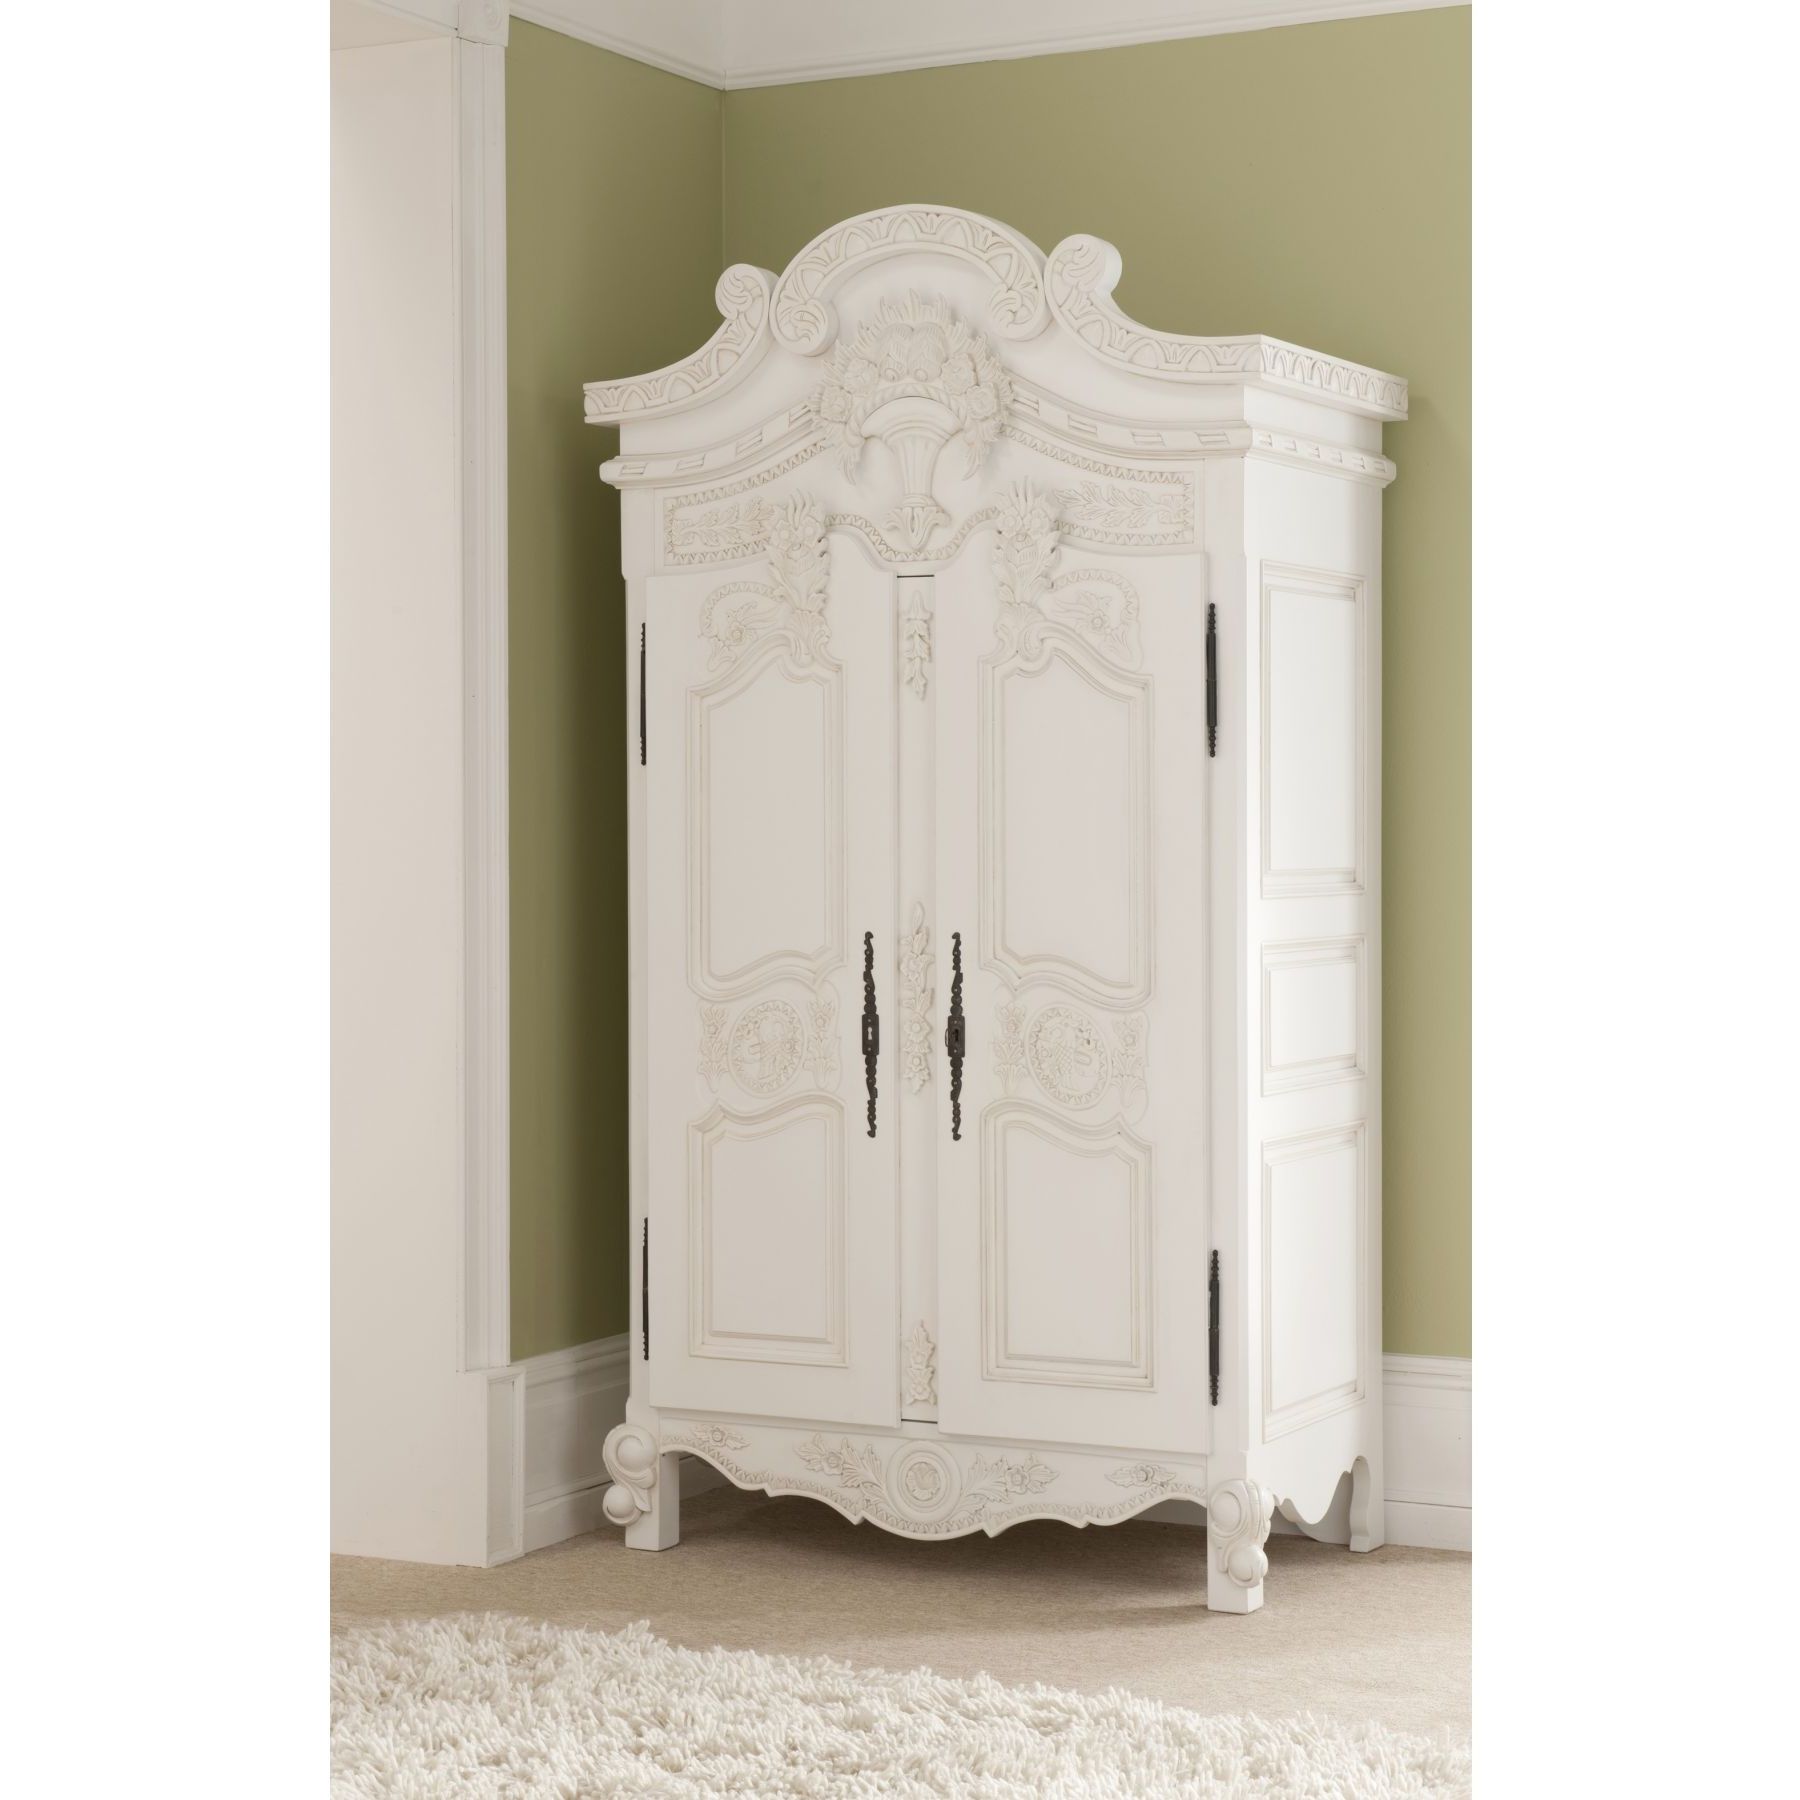 Antique White Wardrobes In Fashionable Rococo Antique French Wardrobe A Stunning Addition To Our Shabby (View 5 of 15)